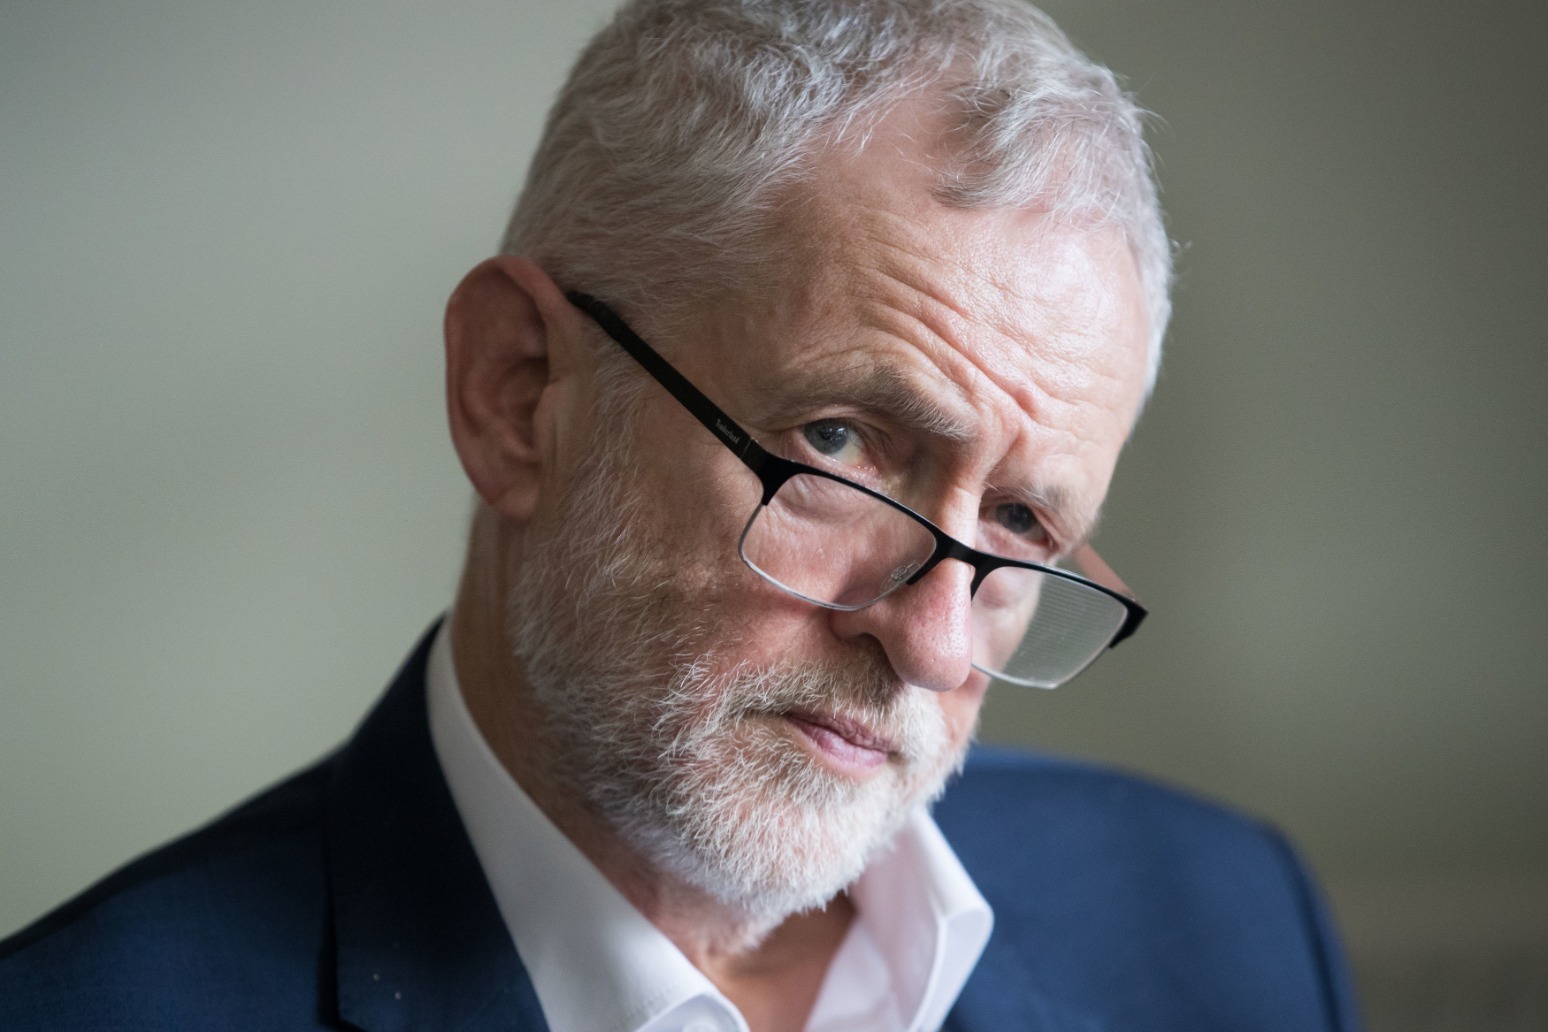 CORBYN ACCUSES TORIES OF BREXIT \'HIJACK\' TO SELL OUT THE NHS 